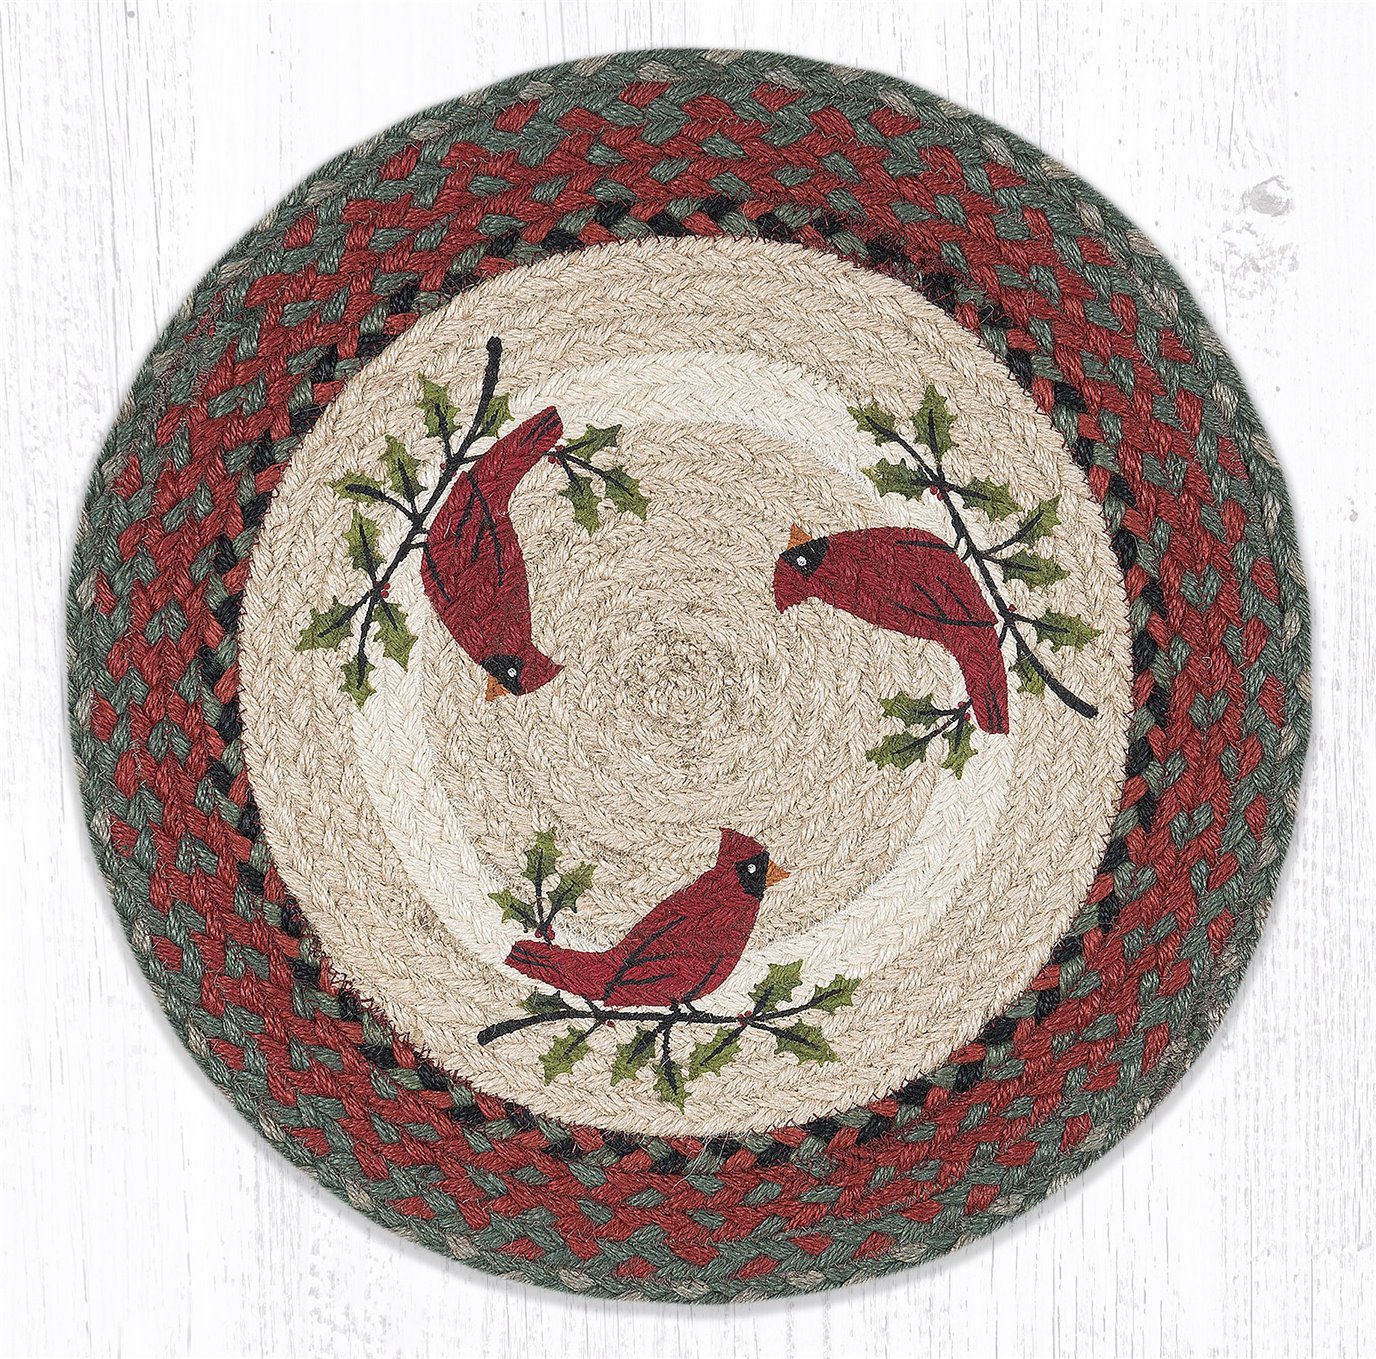 Holly Cardinal Printed Round Braided Placemat 15"x15"